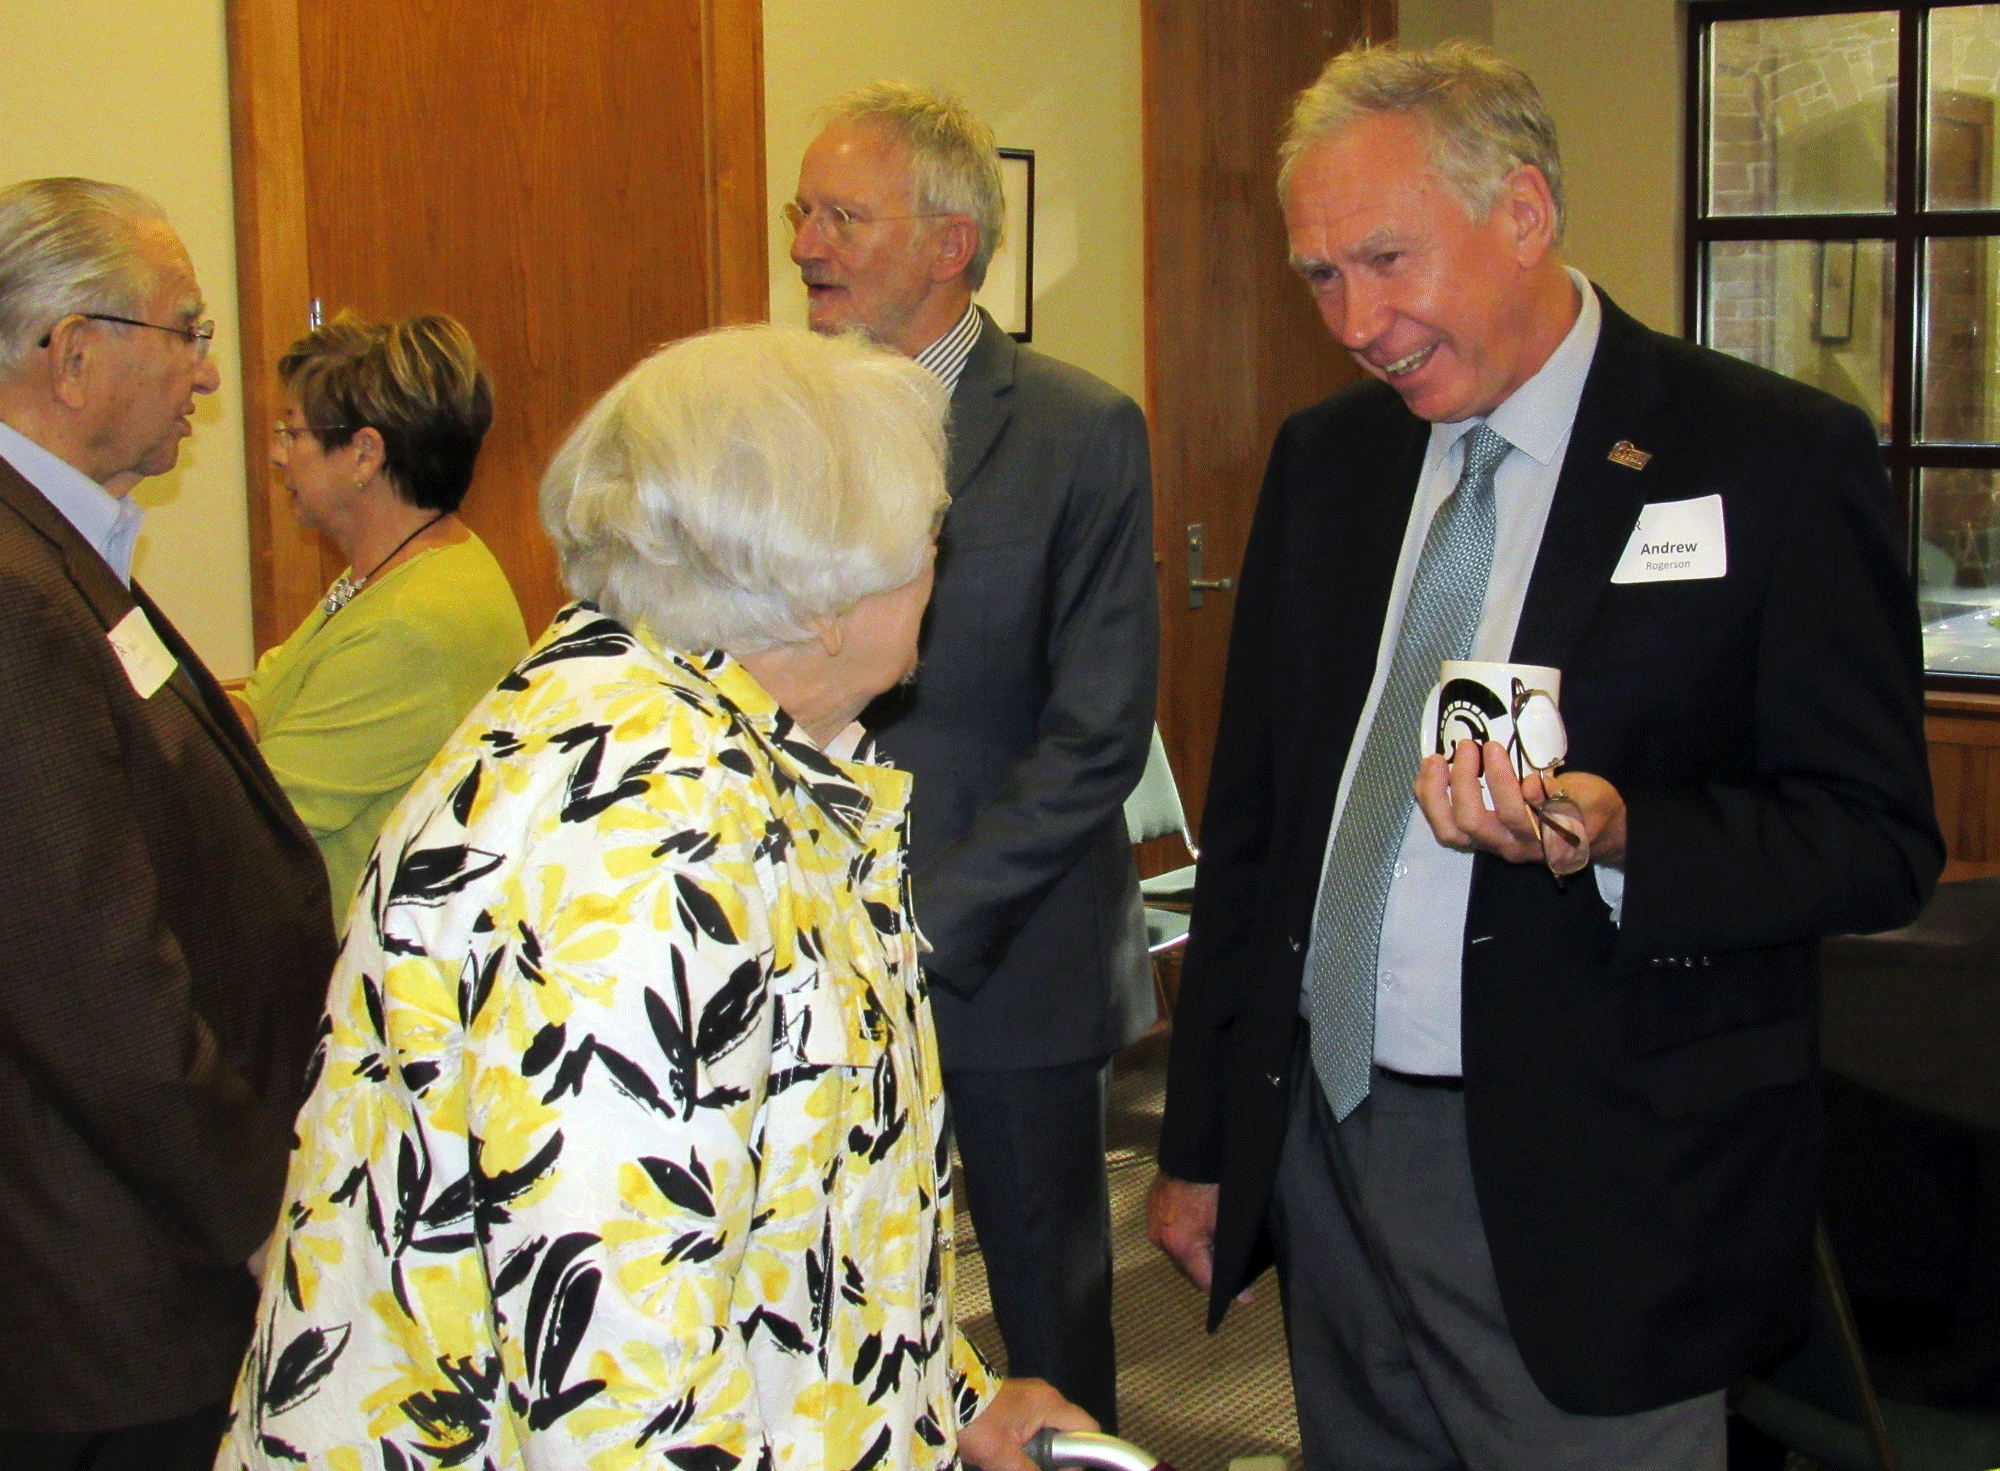 Chancellor Andrew Rogerson (right) talks to Dr. Mary Good (left) during the "Coffee with the Chancellor" event.